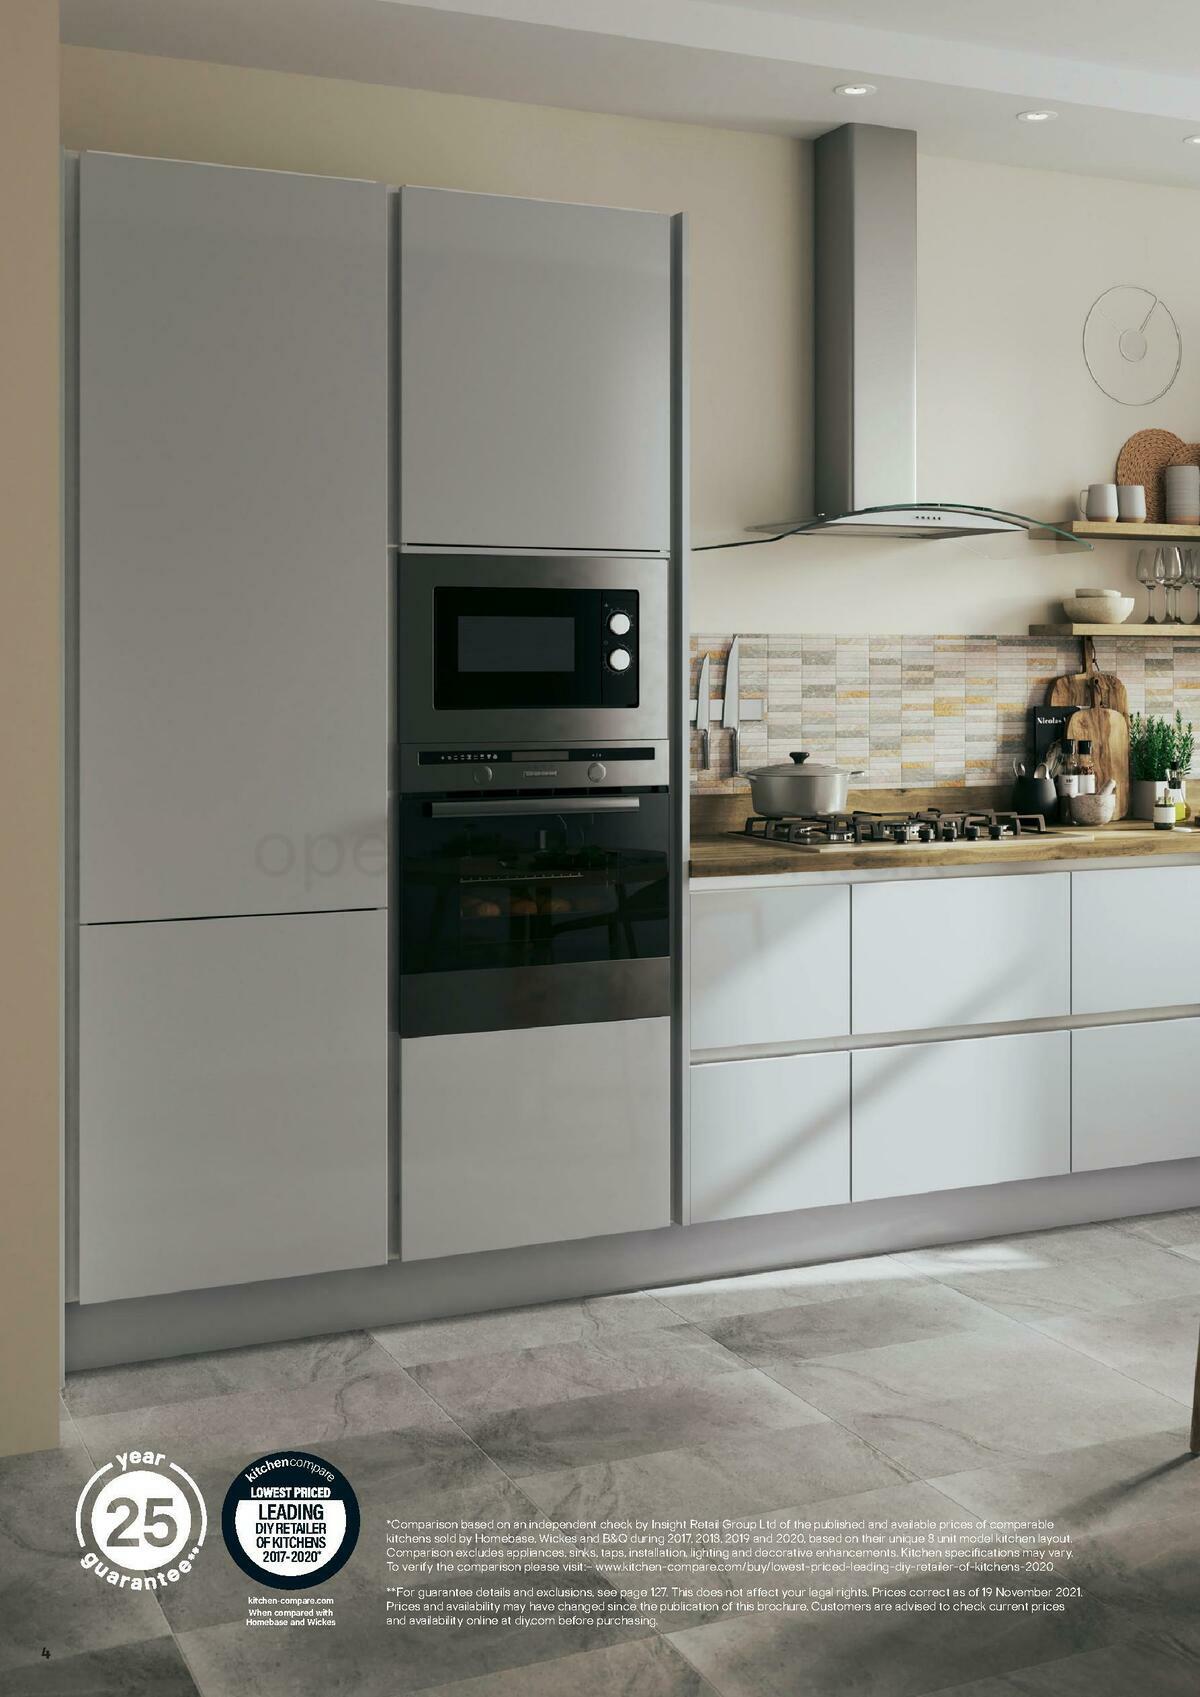 B&Q Kitchens Inspiration Offers from 1 December